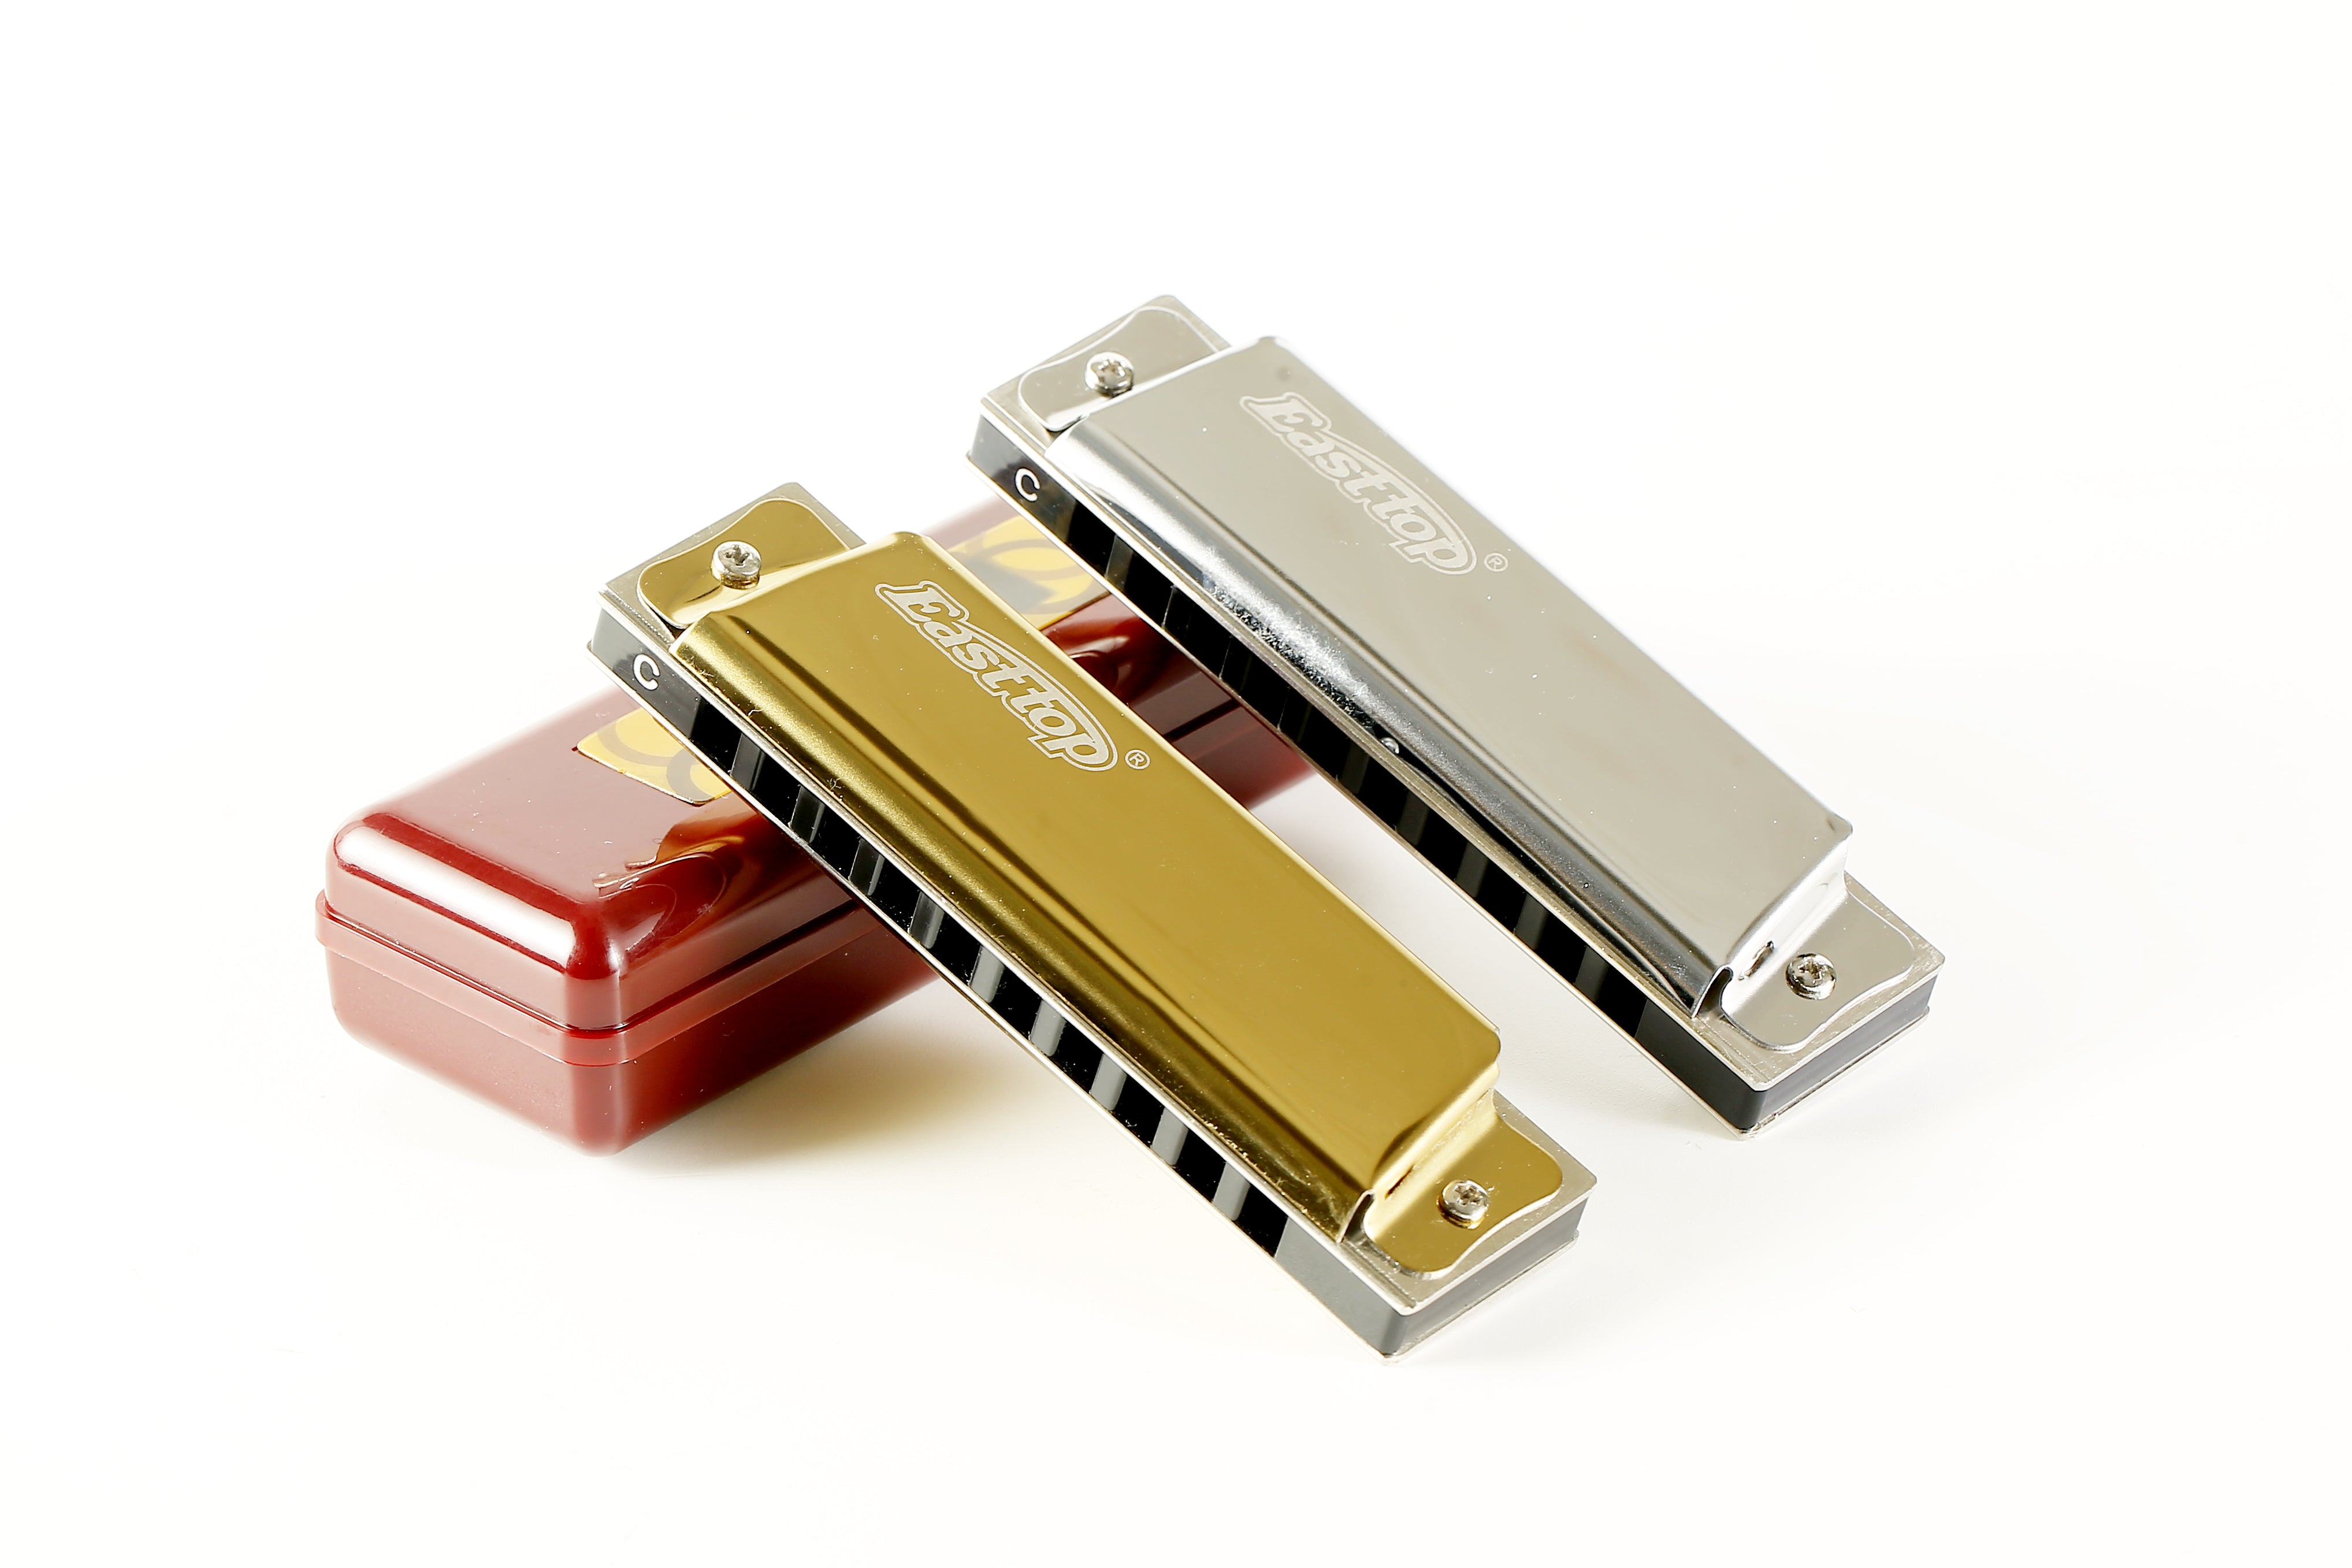 East top 10 Holes 20 Tones Blues C Diatonic Harmonica, Harmonica C For Adults, Beginners, Professional and Students - Easttop harmonica